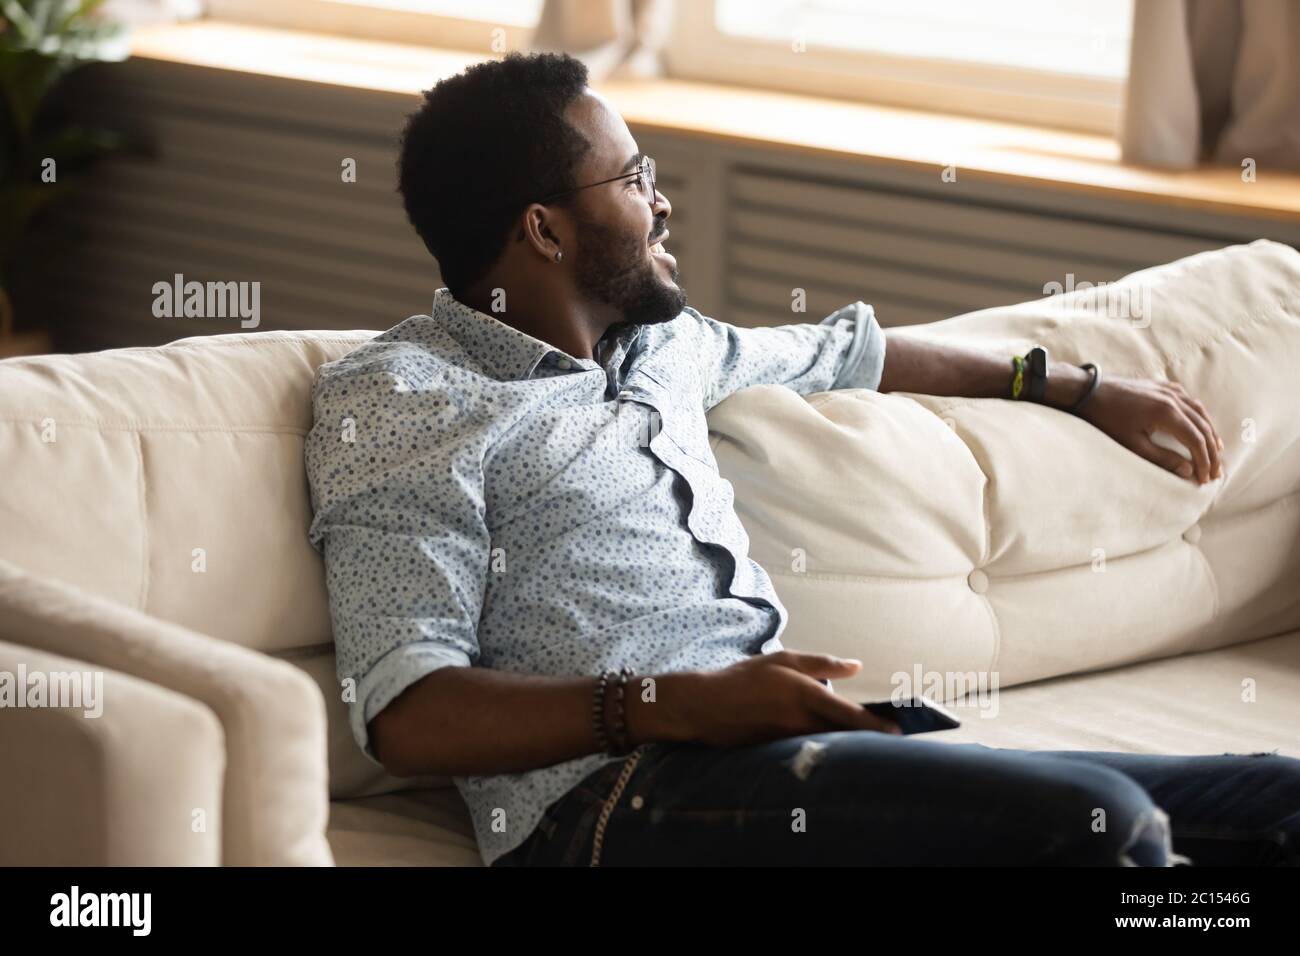 Guy seated on couch breath fresh air looking at window Stock Photo